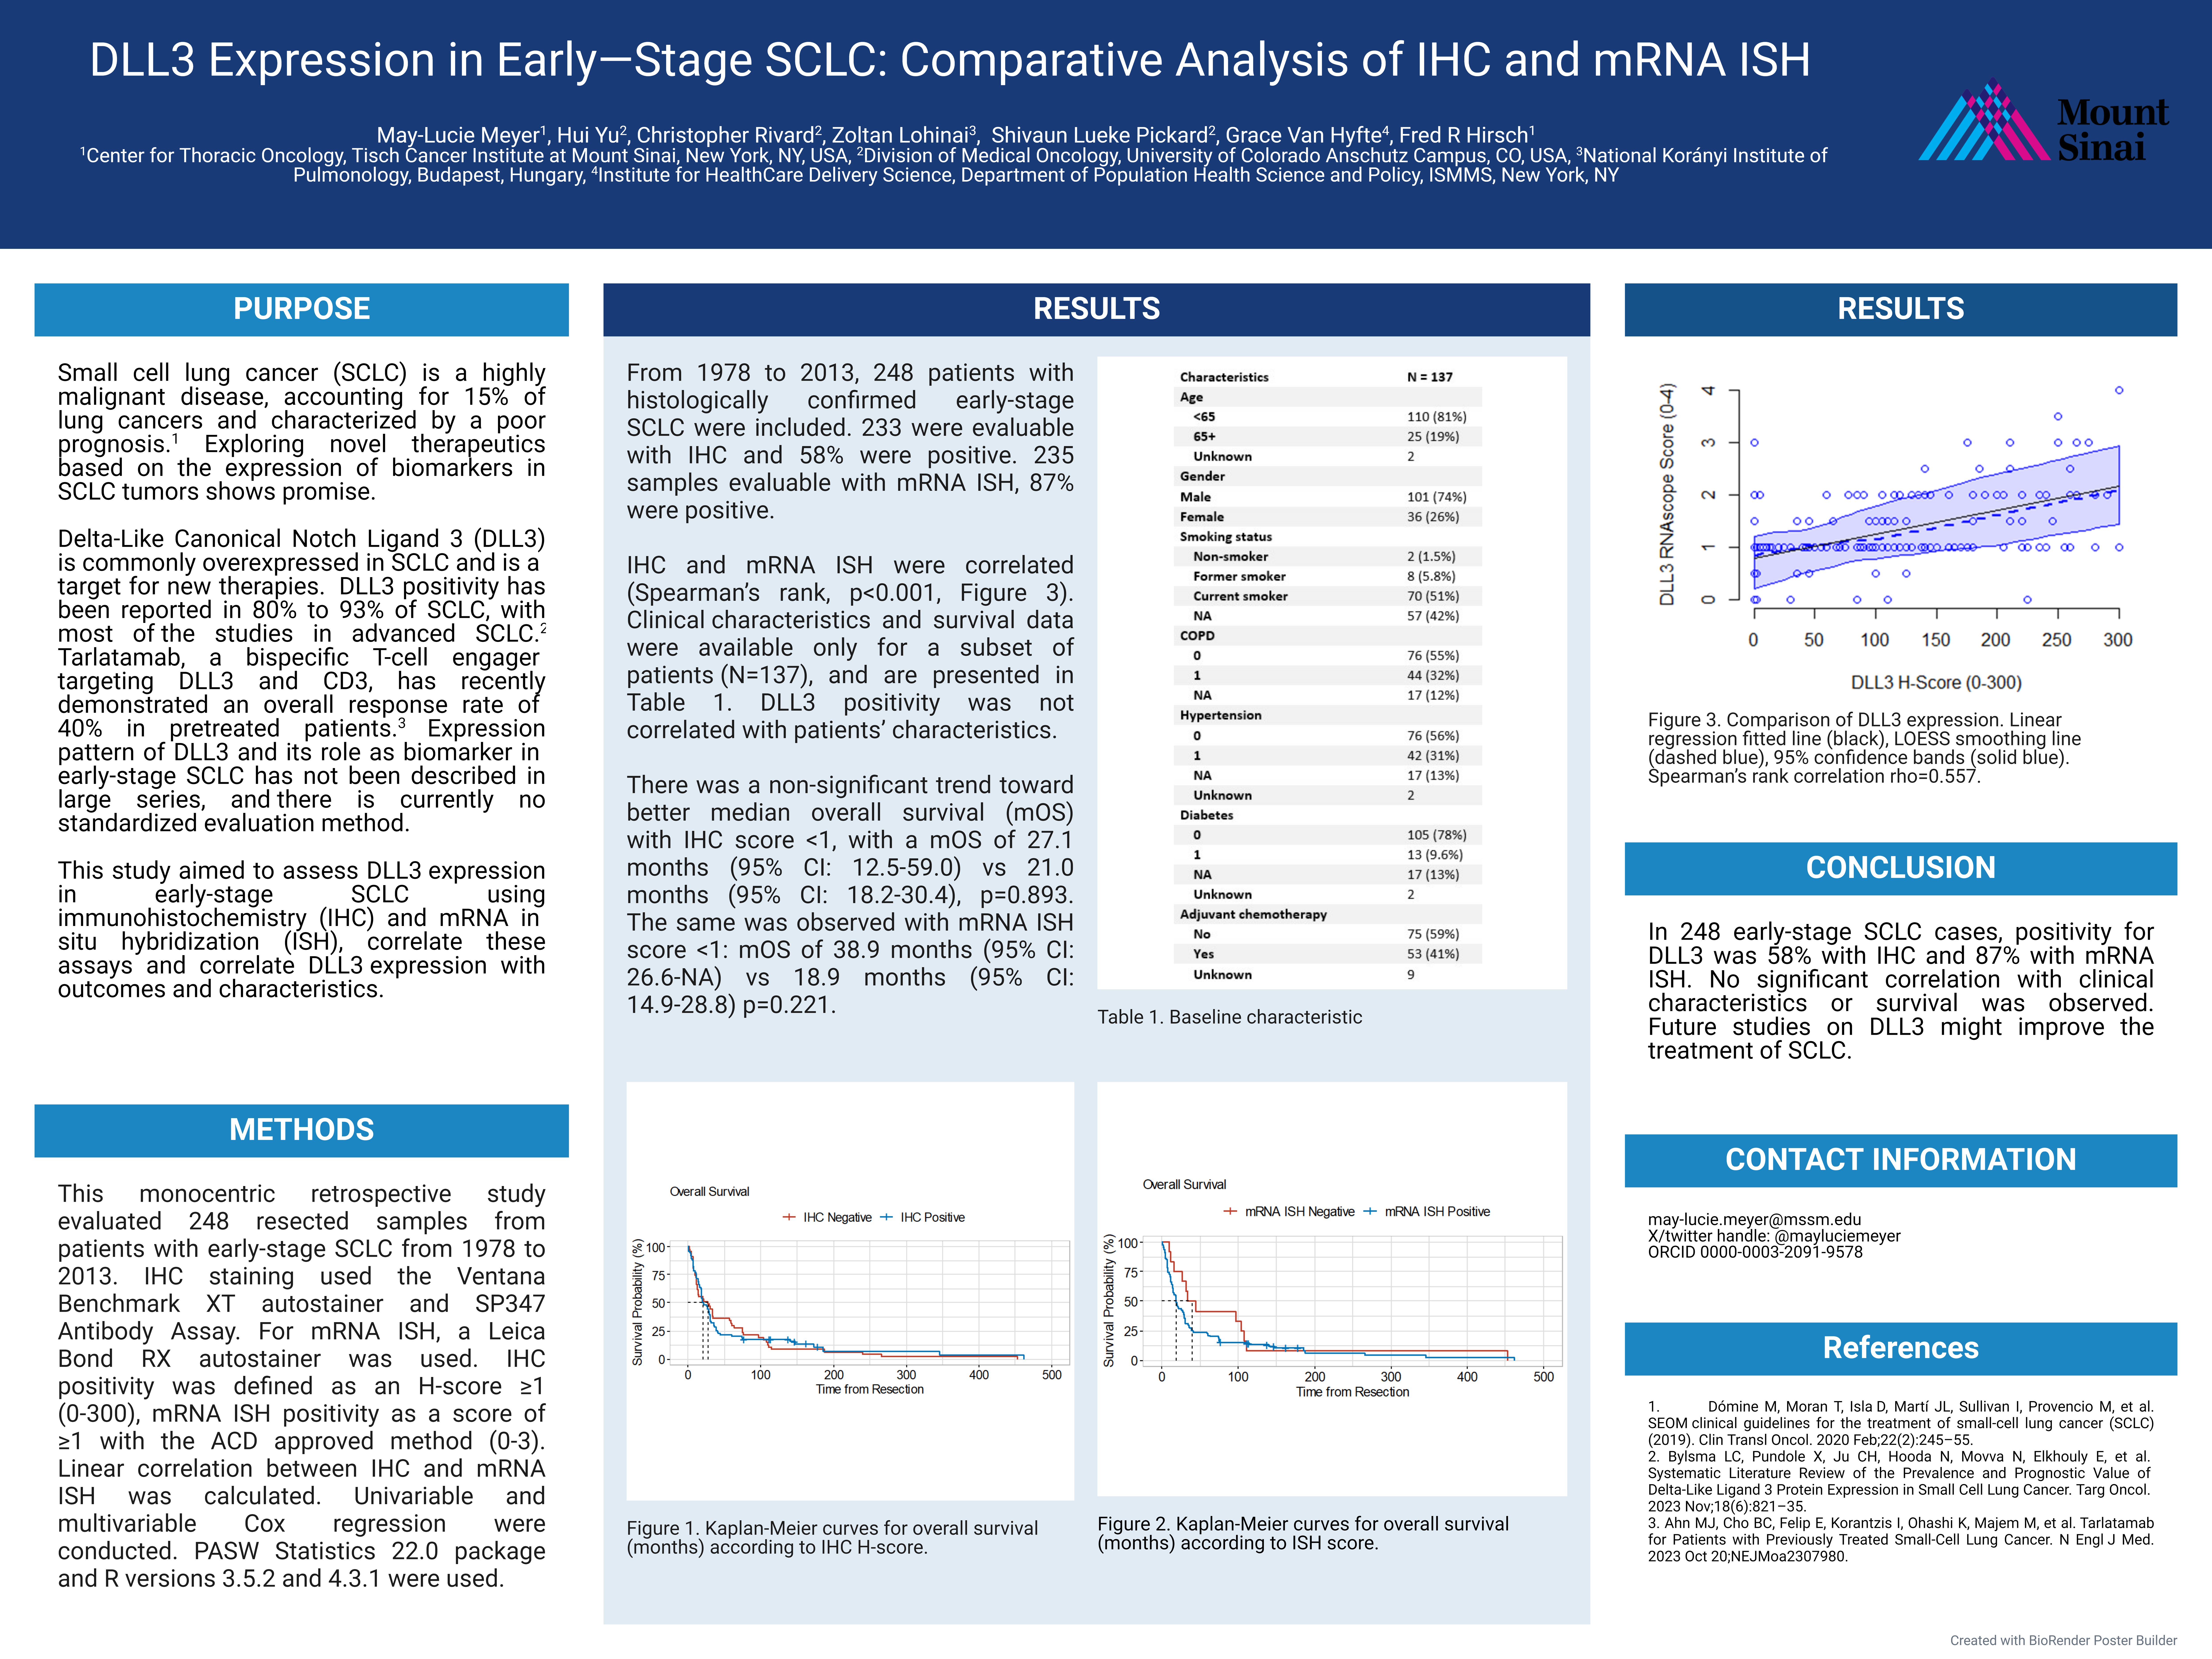 DLL3 expression in SCLC Poster.jpeg